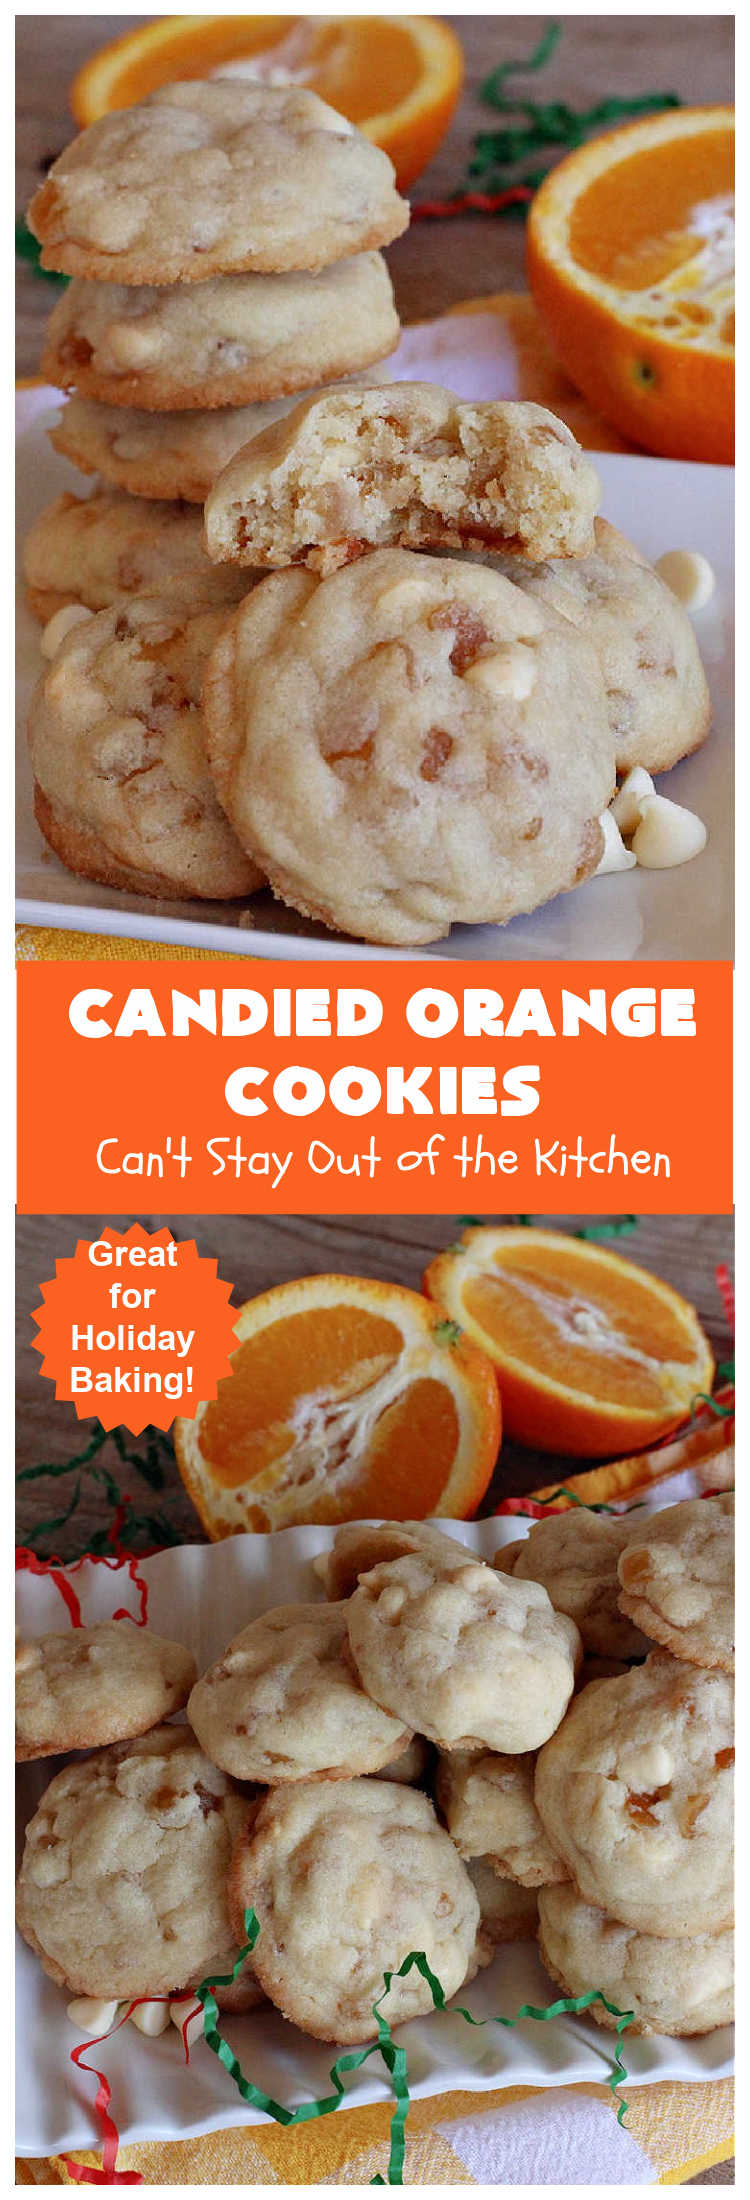 Candied Orange Cookies | Can't Stay Out of the Kitchen